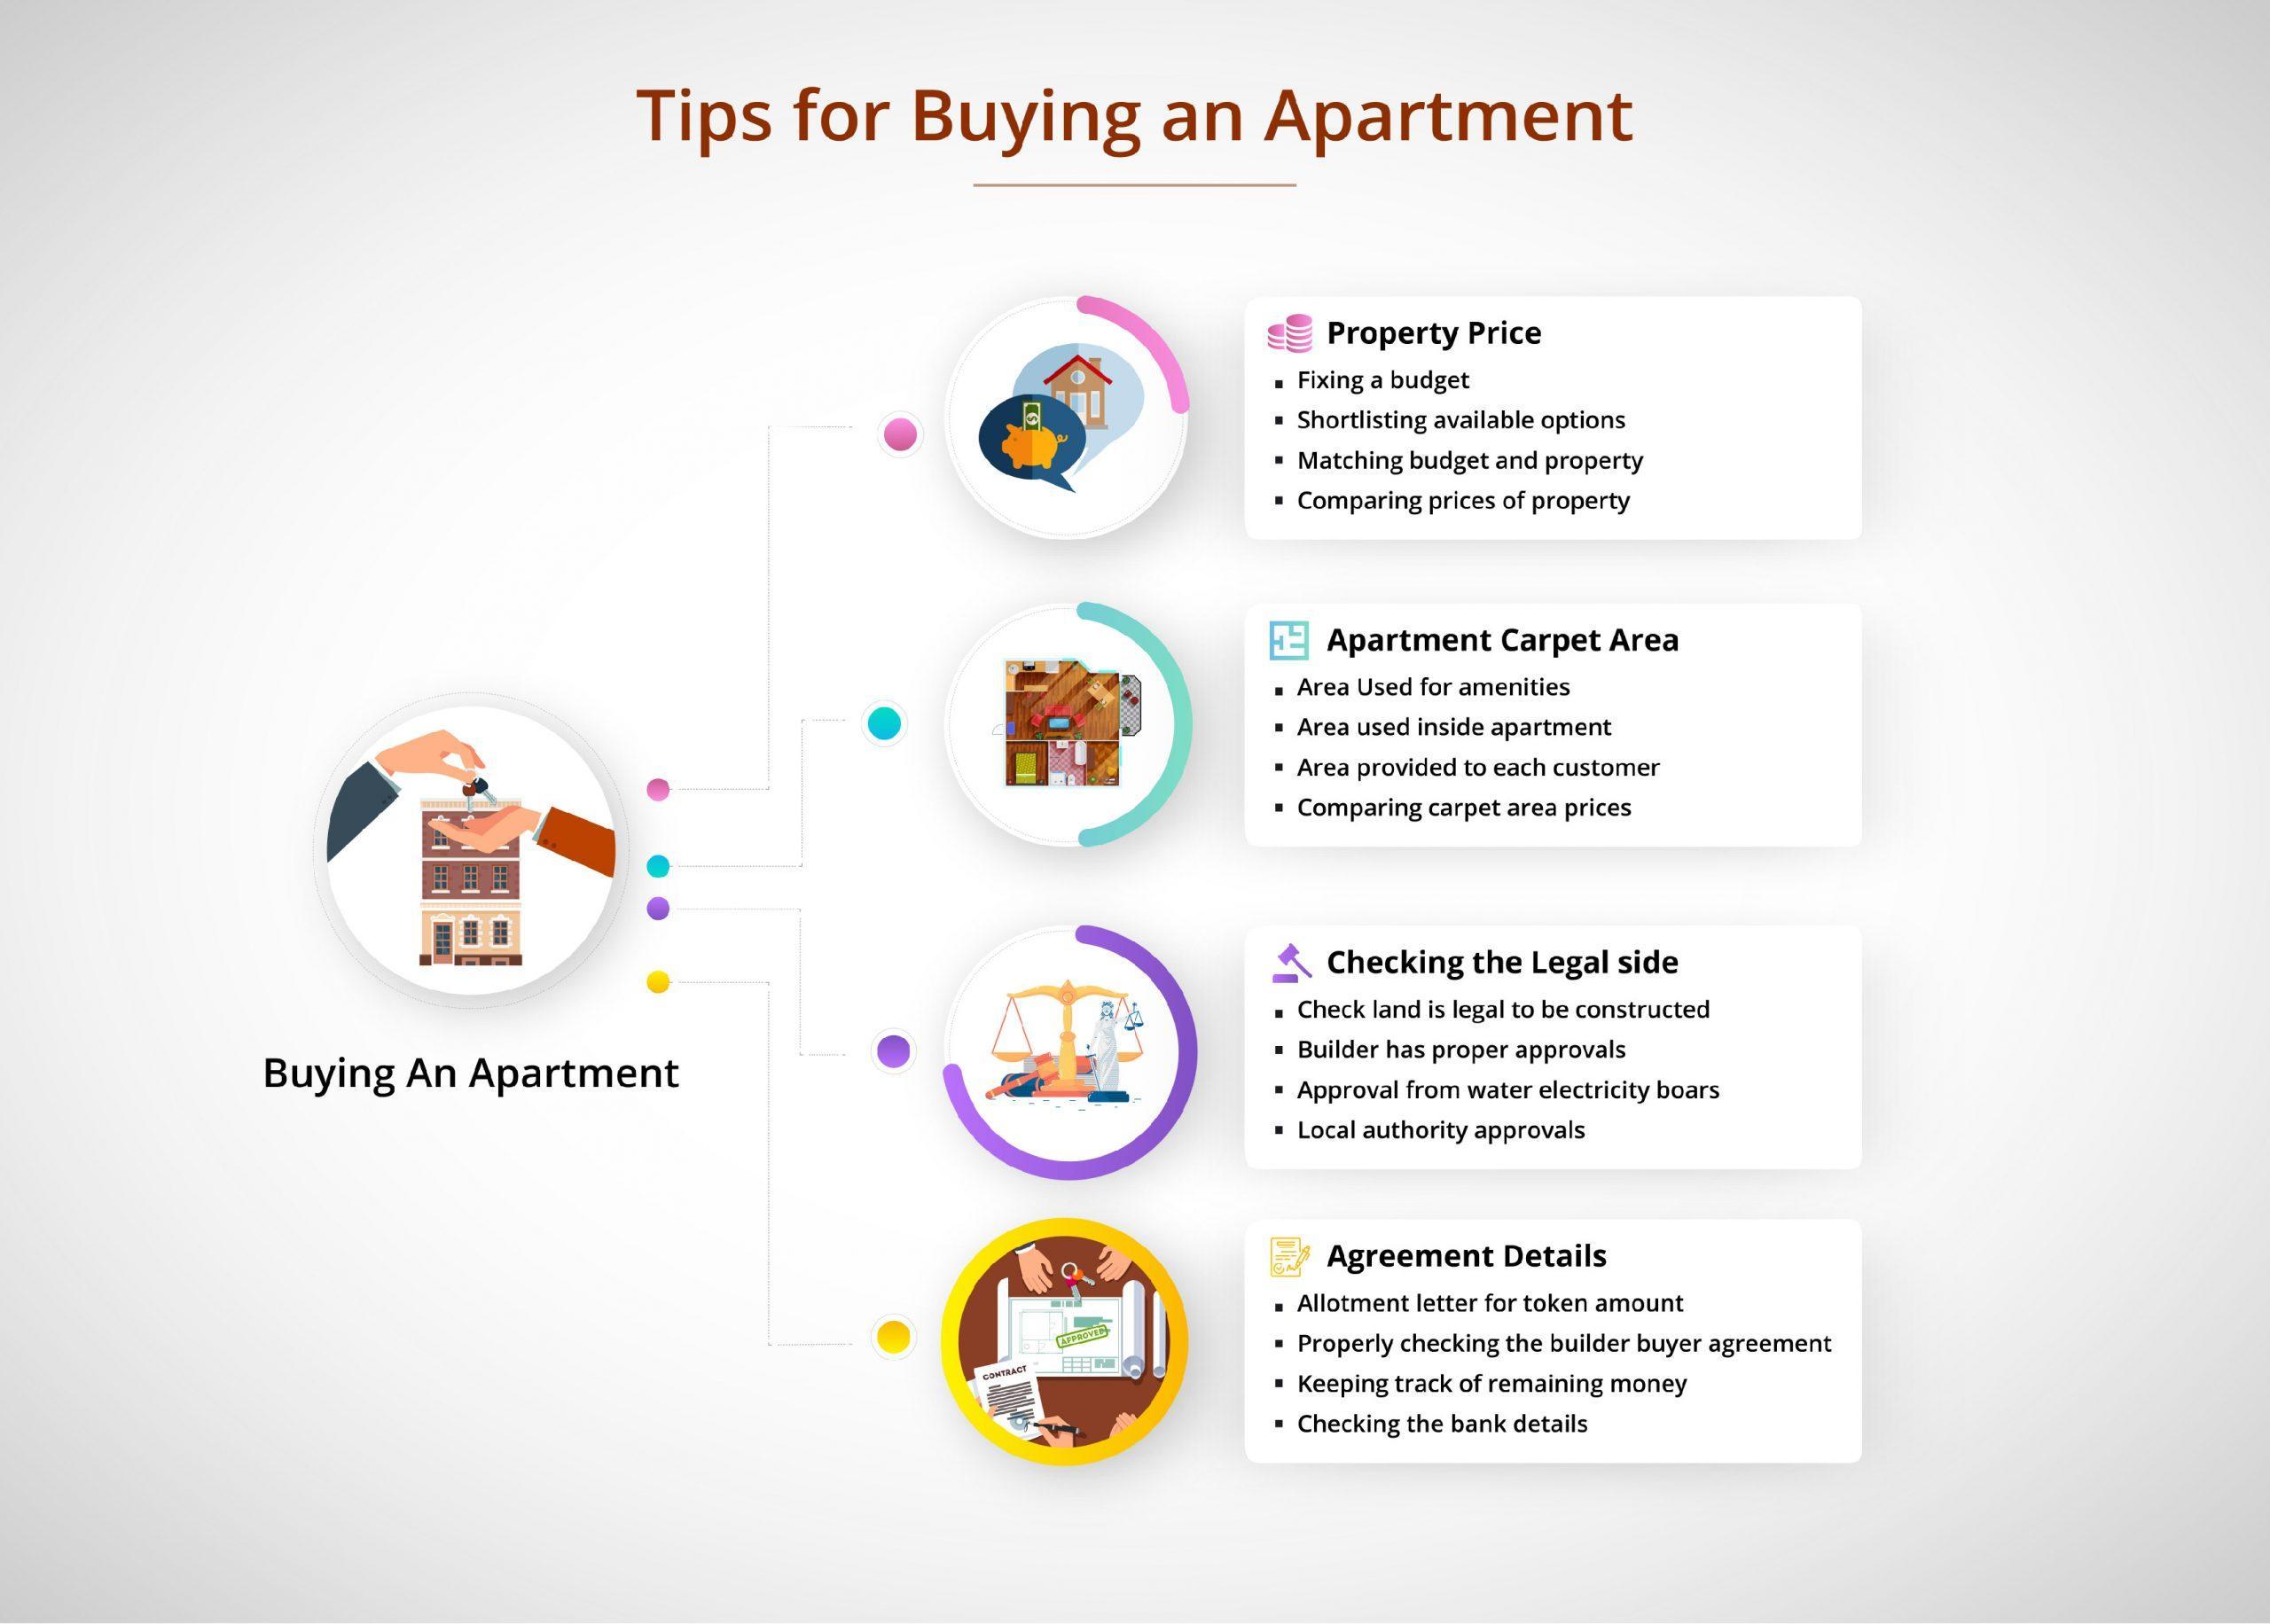 Important Things to Keep in Mind While Buying Apartments